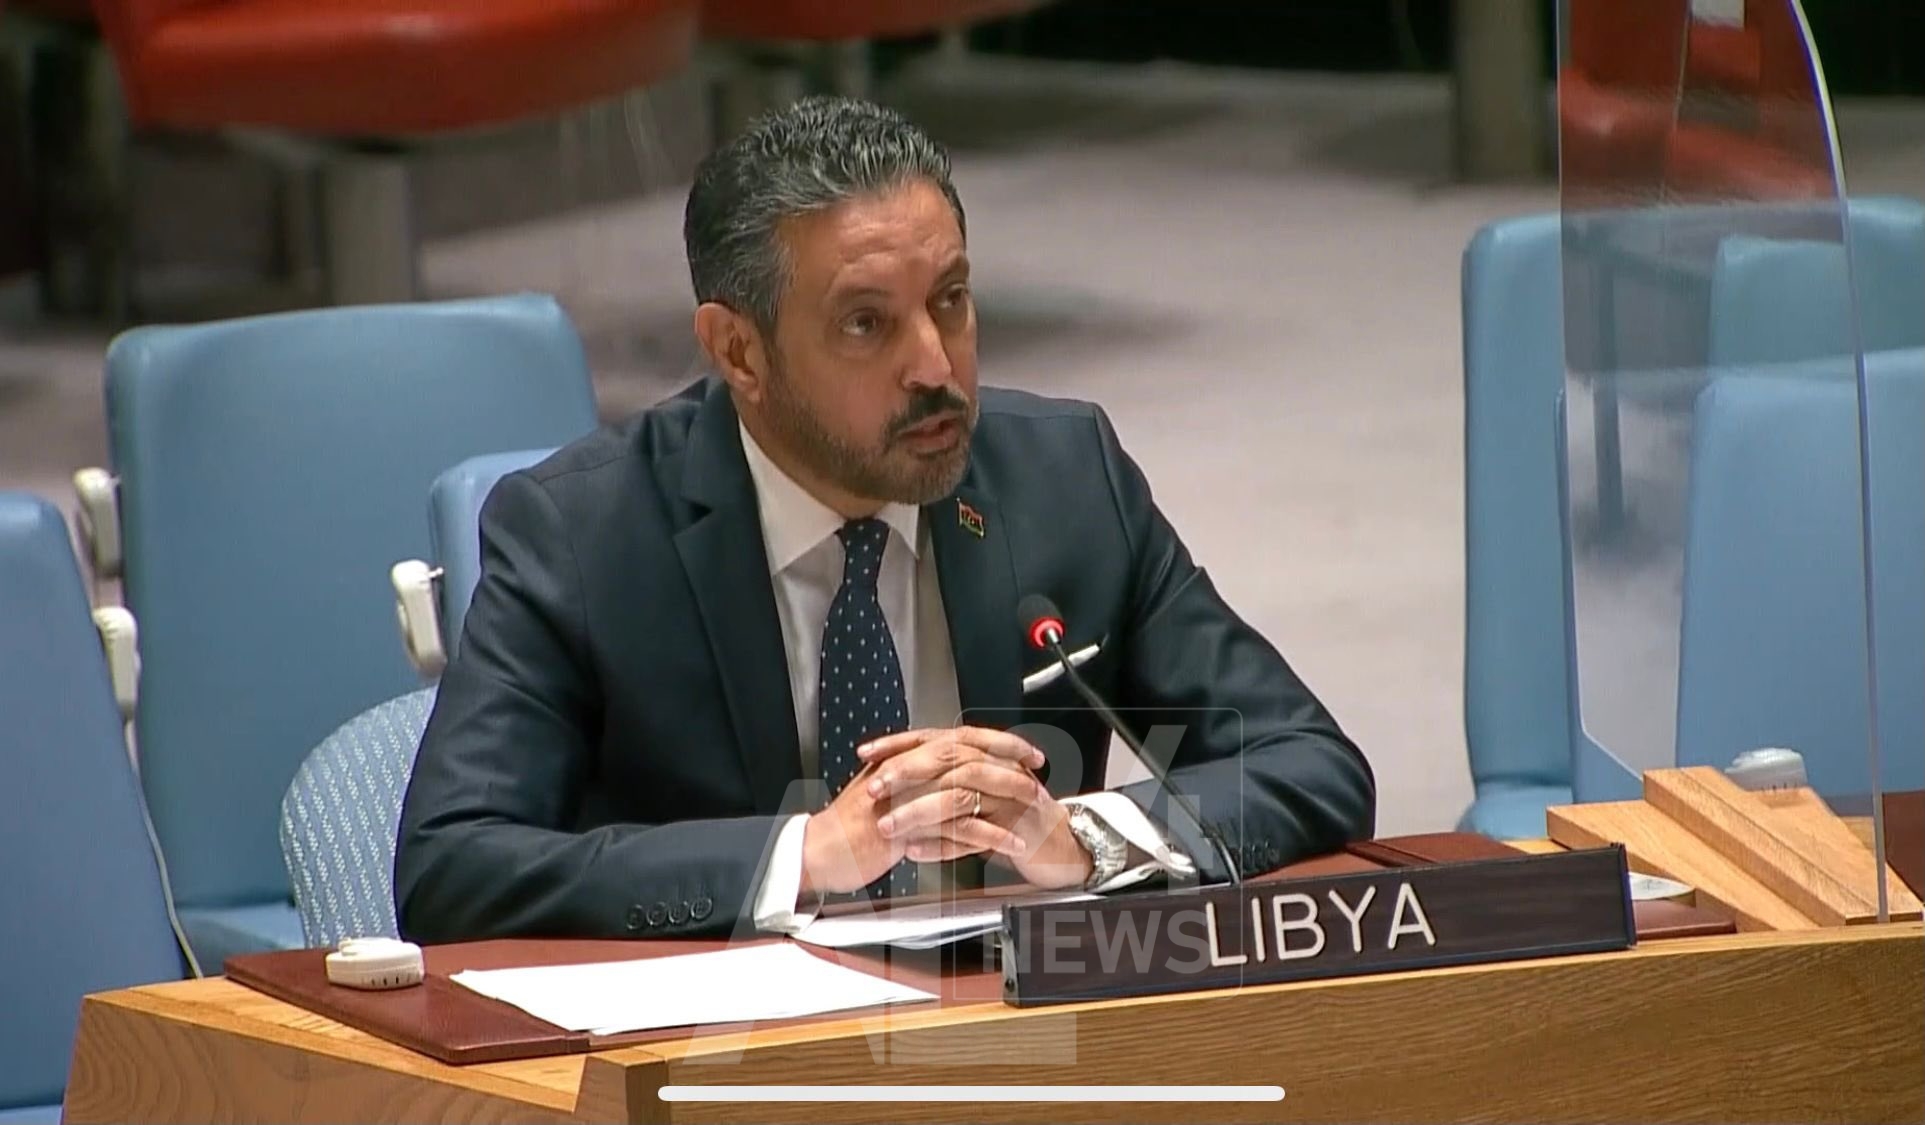 Al-Sunni affirms that Libya still maintains its position regarding the just cause of the Palestinian people.